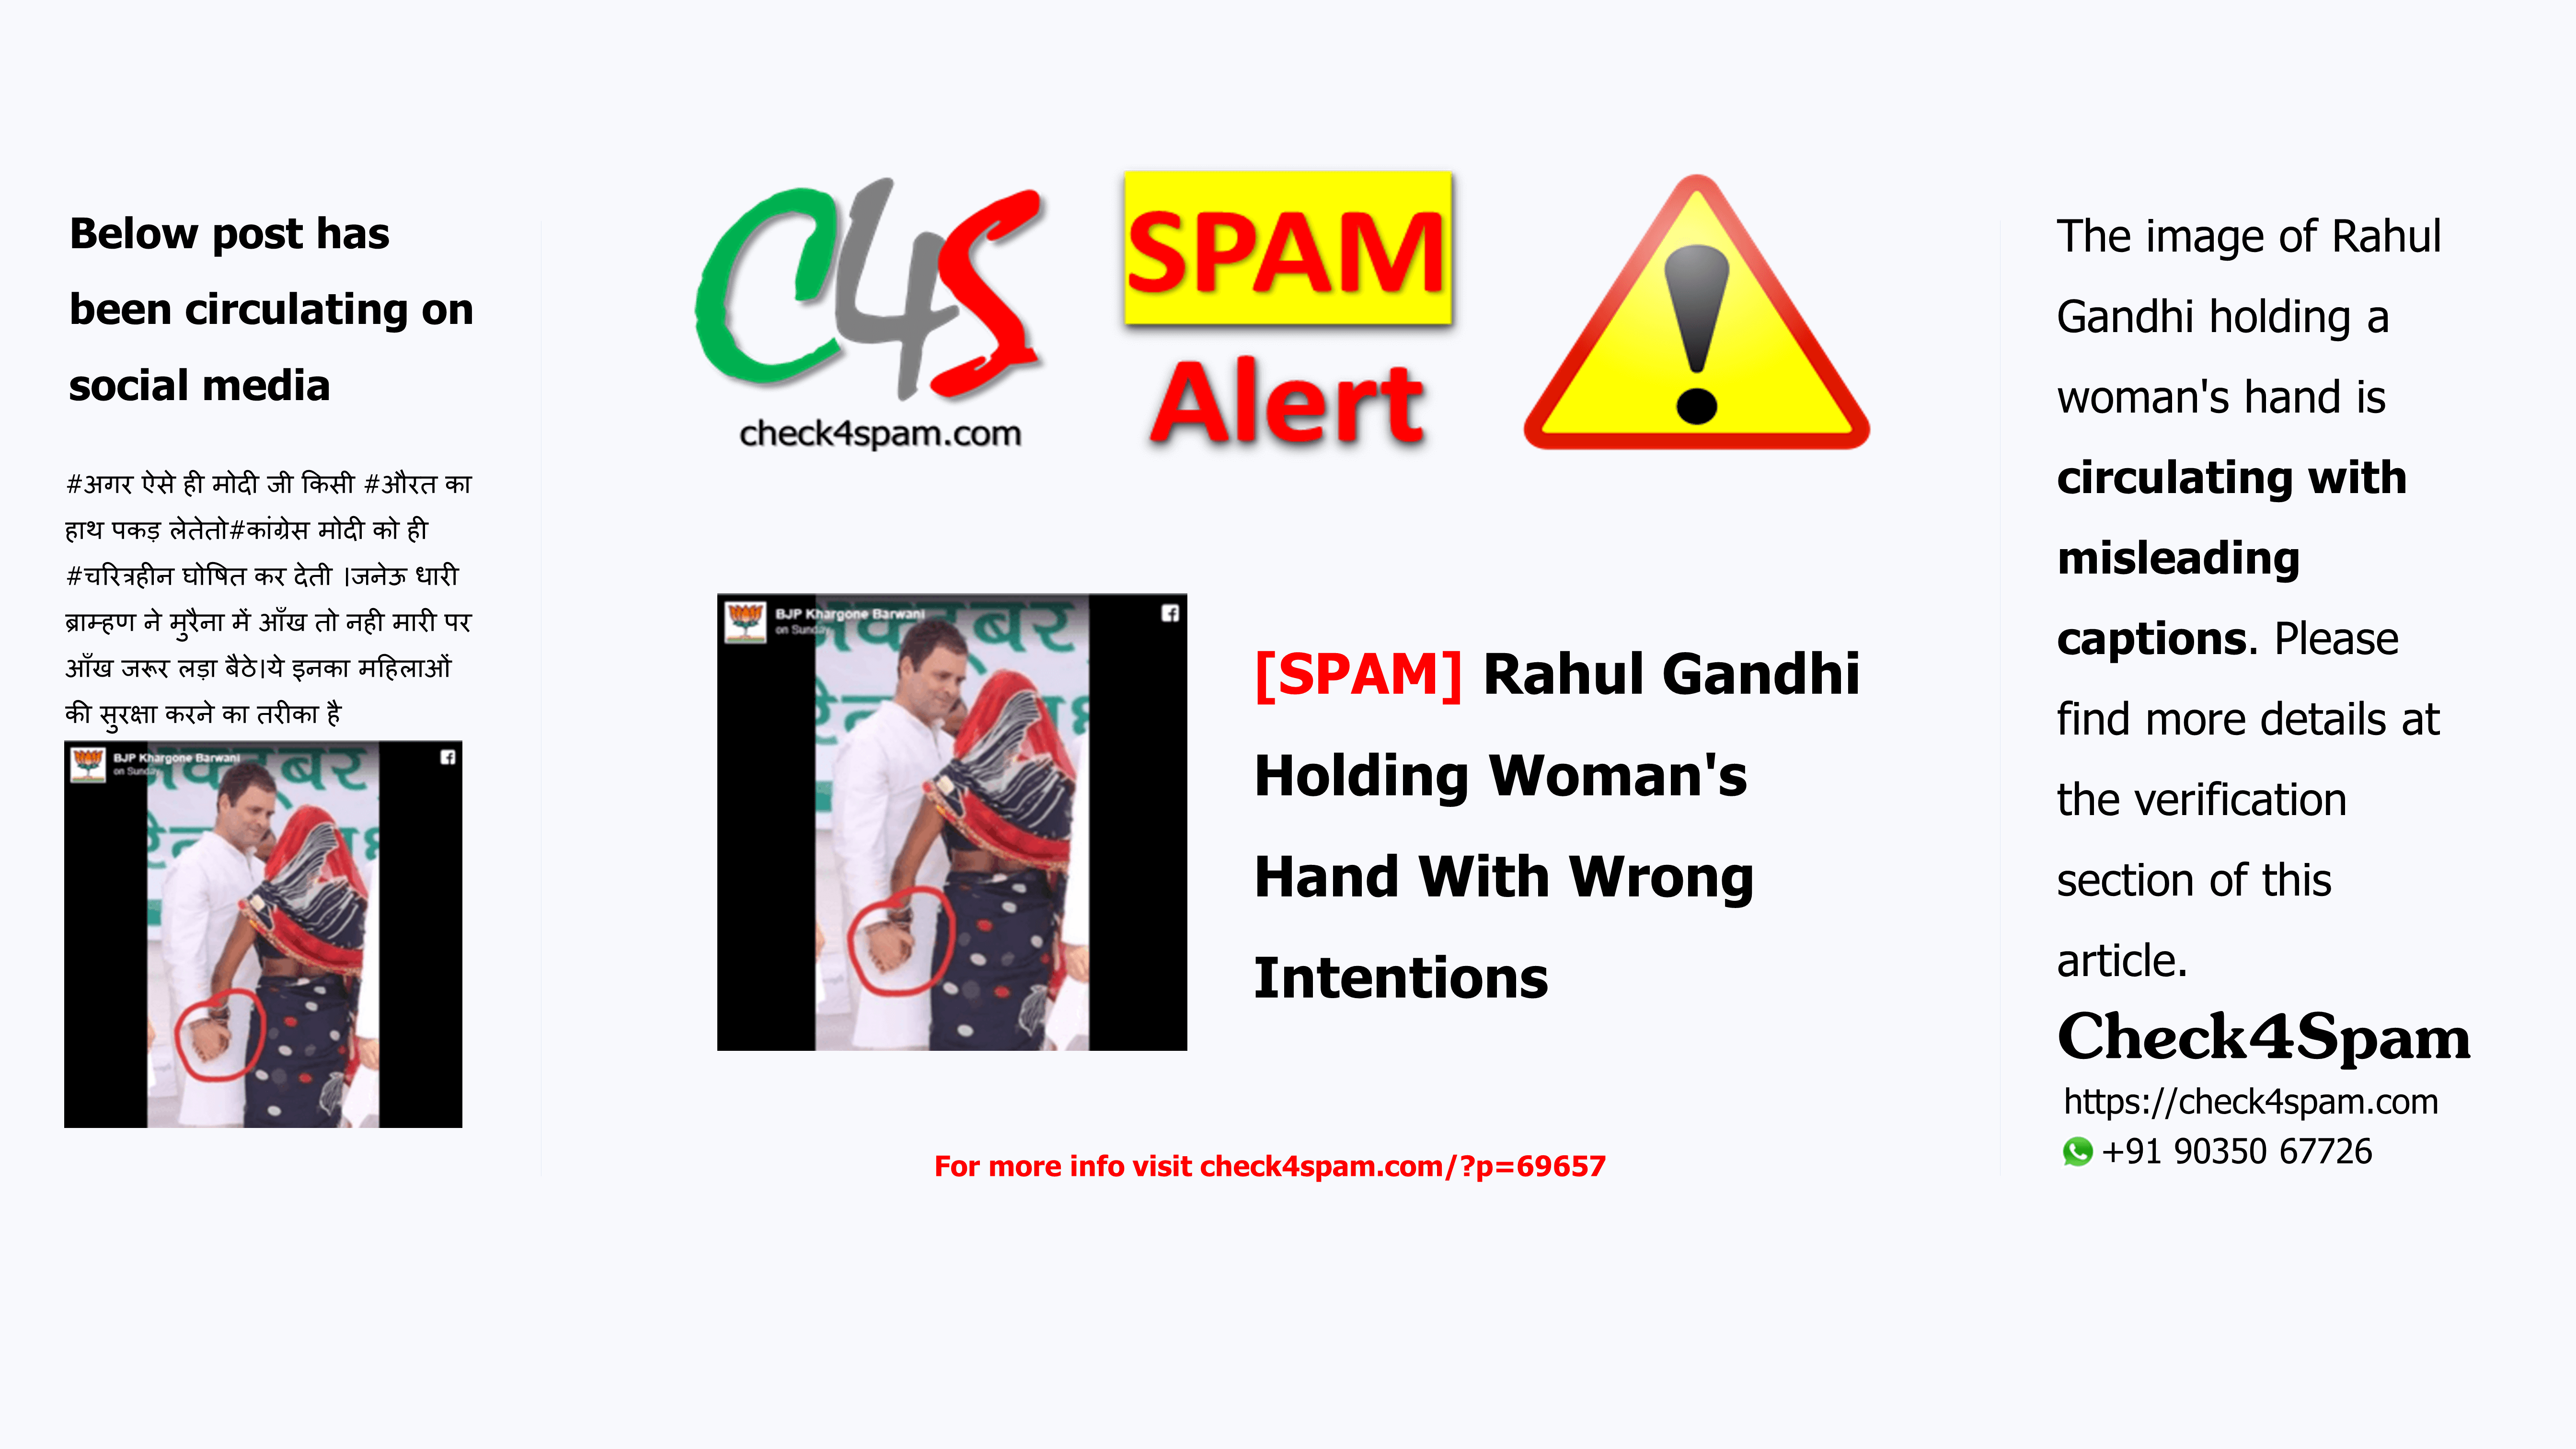 [SPAM] Rahul Gandhi Holding Woman's Hand With Wrong Intentions